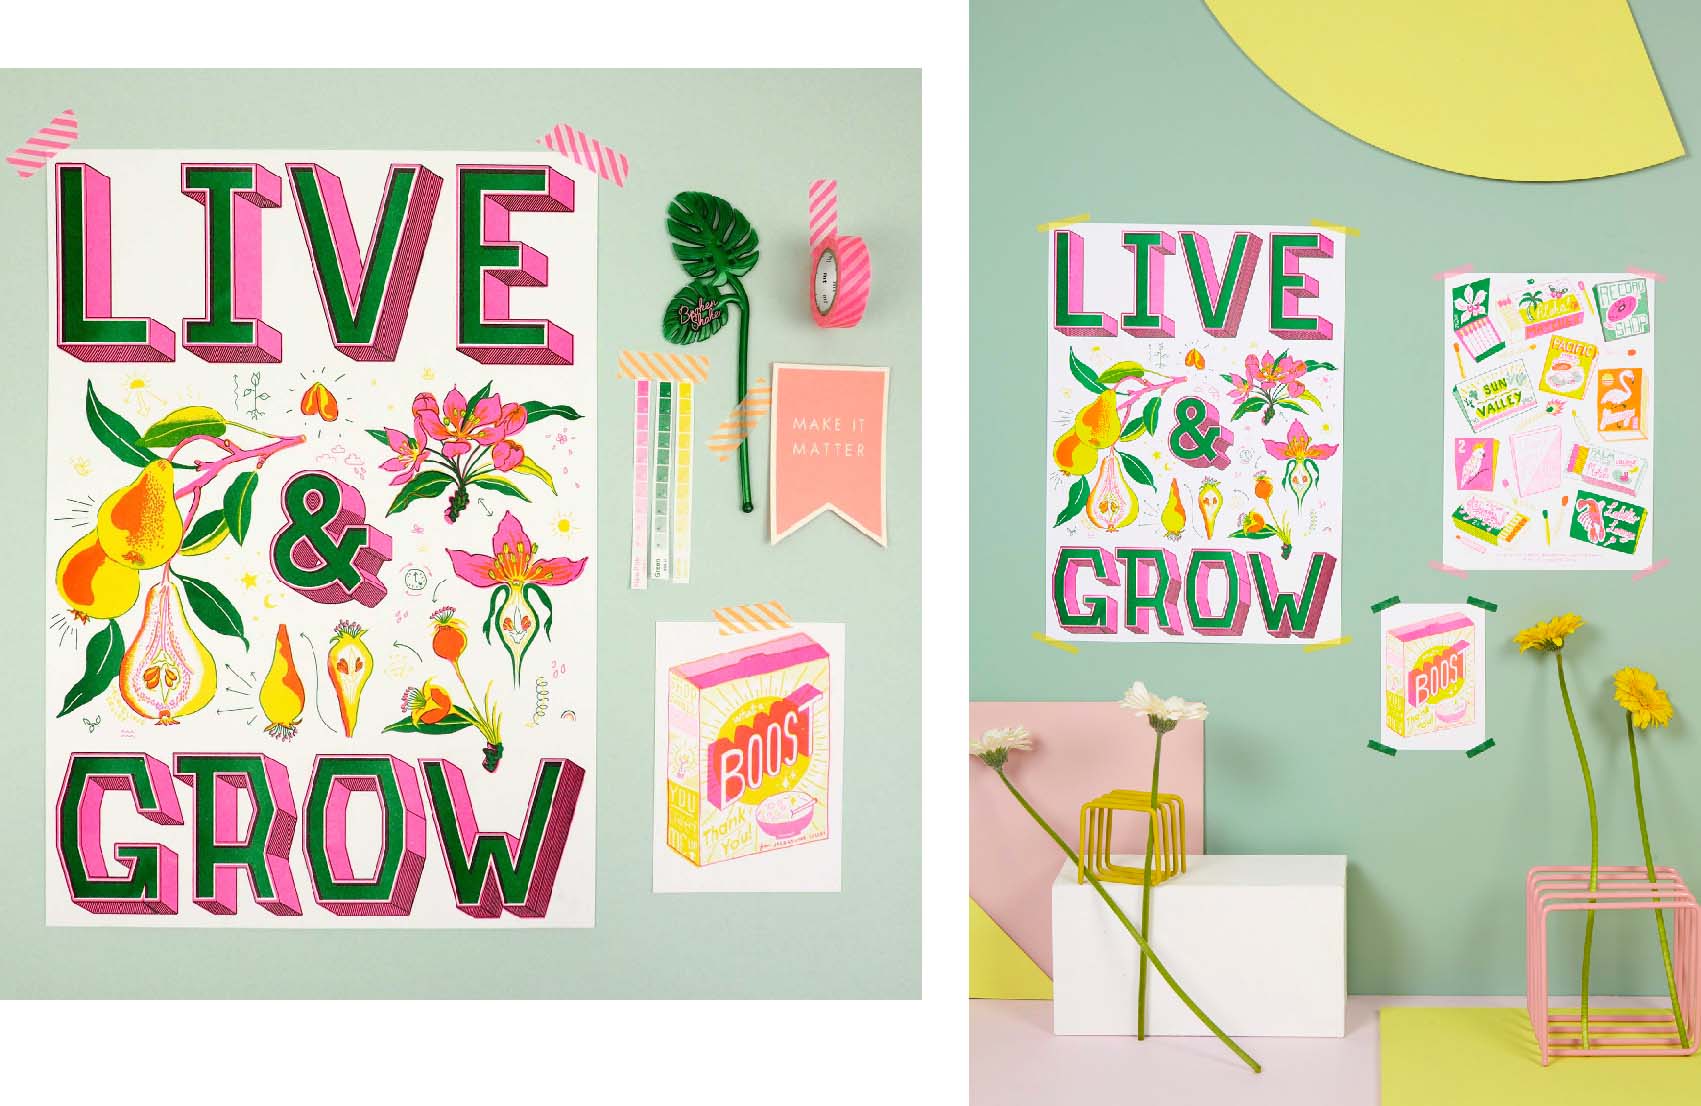 Live-And-Grow-Risograph-print-Jacqueline-colley.jpg